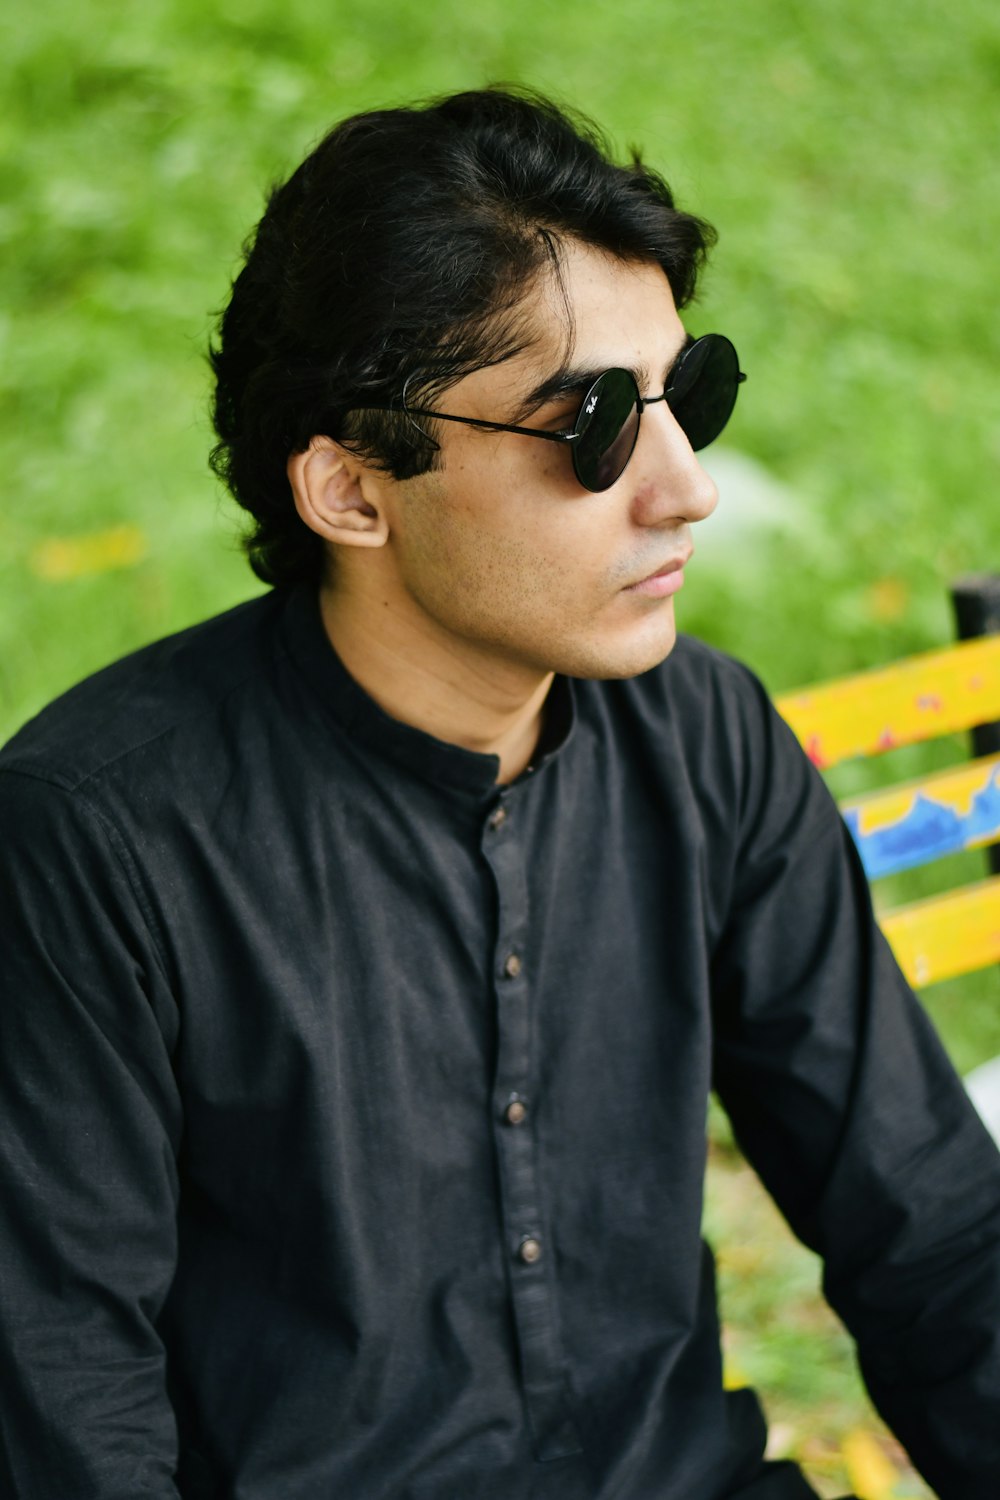 a man wearing sunglasses sitting on a bench